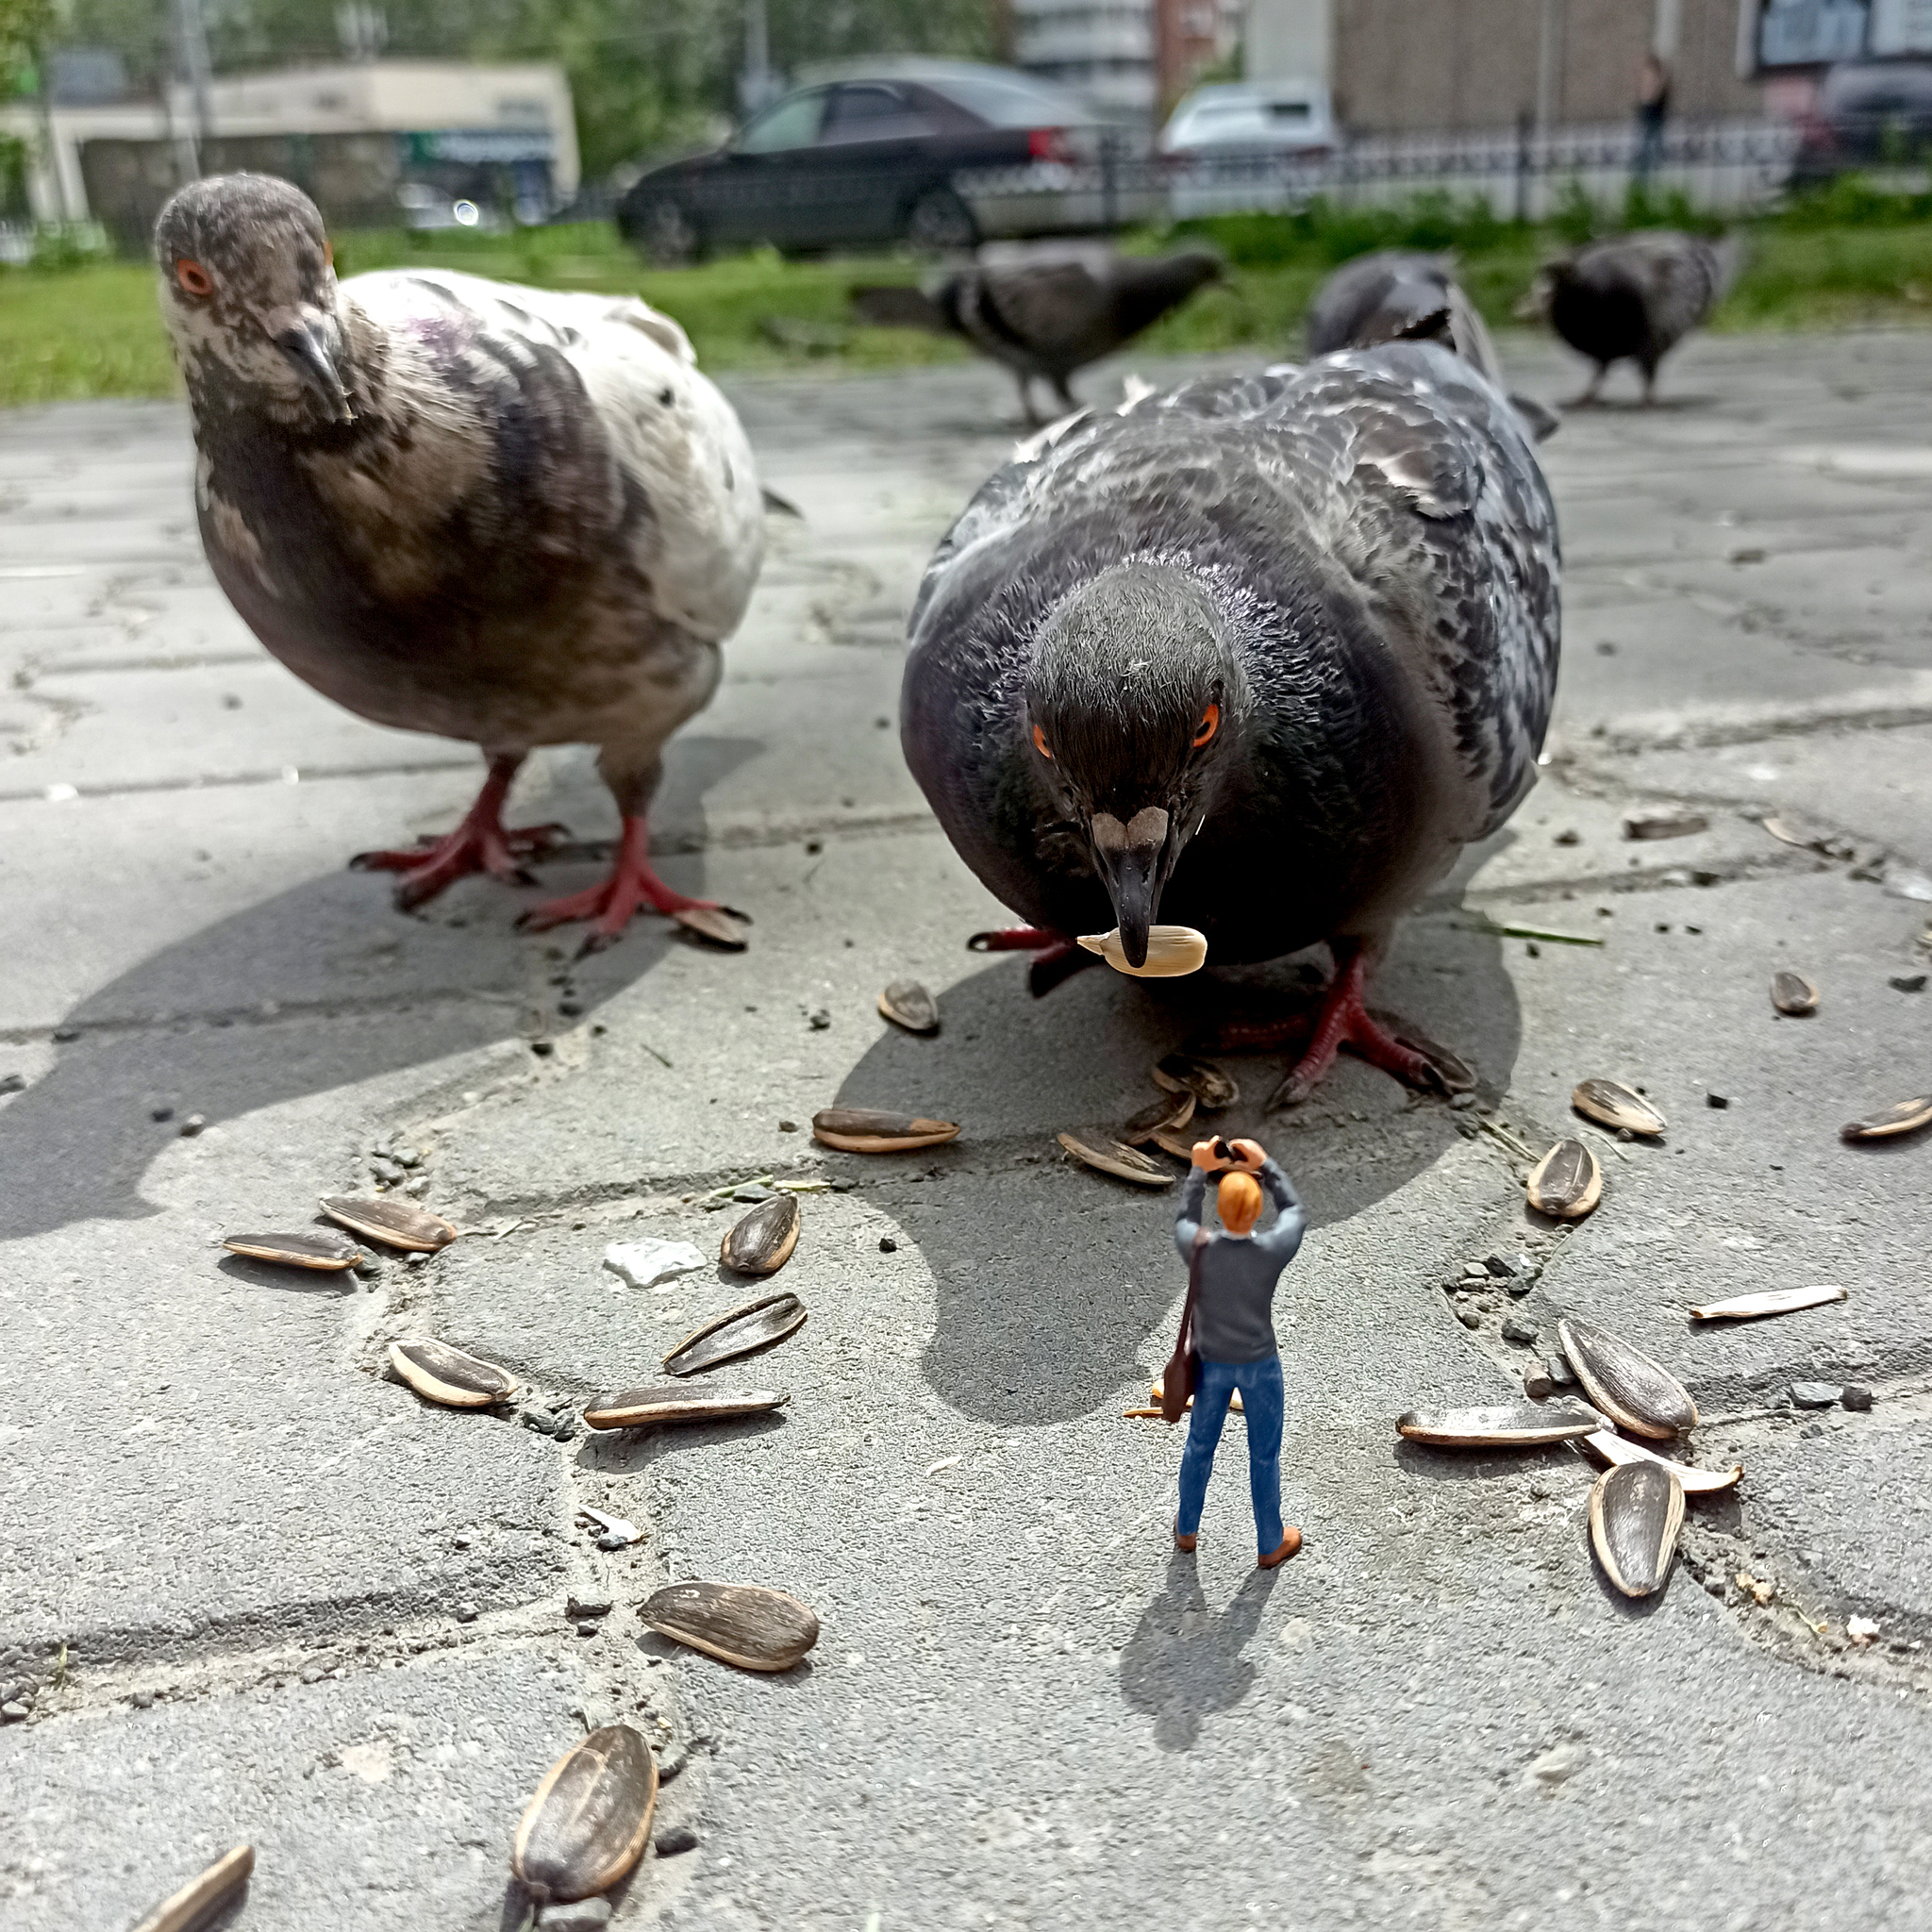 Fearless paparazzi - My, Figurines, Modeling, 3D печать, Scale model, Miniature, Painting miniatures, Stand modeling, Painting, Collecting, Painting, 3D modeling, Pigeon, Photographer, Streamers, Paparazzi, Longpost, Needlework without process